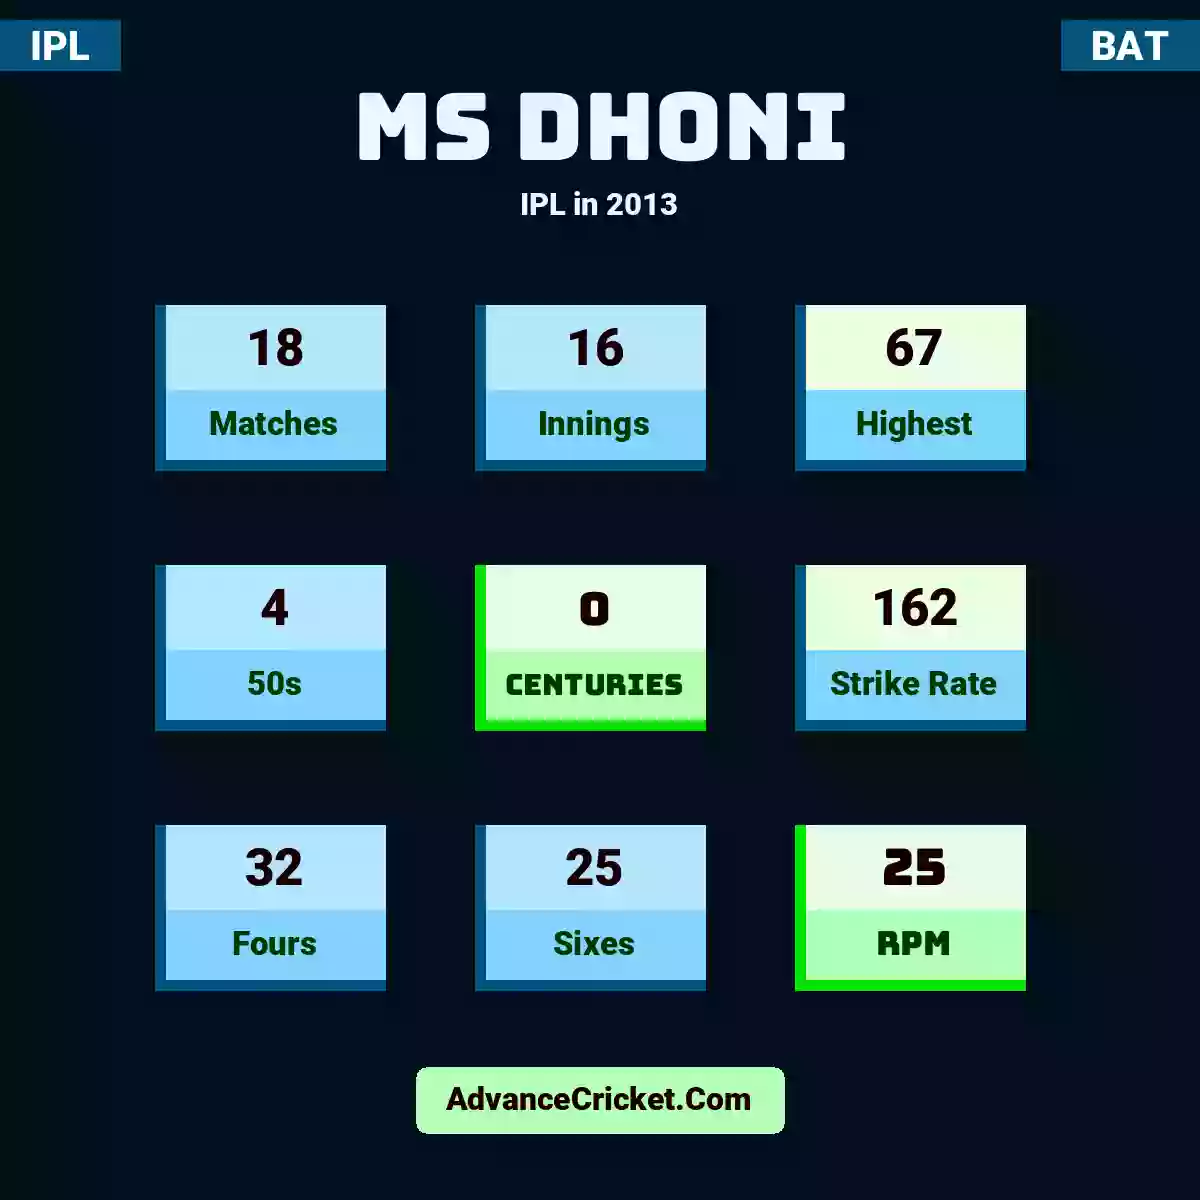 MS Dhoni IPL  in 2013, MS Dhoni played 18 matches, scored 67 runs as highest, 4 half-centuries, and 0 centuries, with a strike rate of 162. M.Dhoni hit 32 fours and 25 sixes, with an RPM of 25.